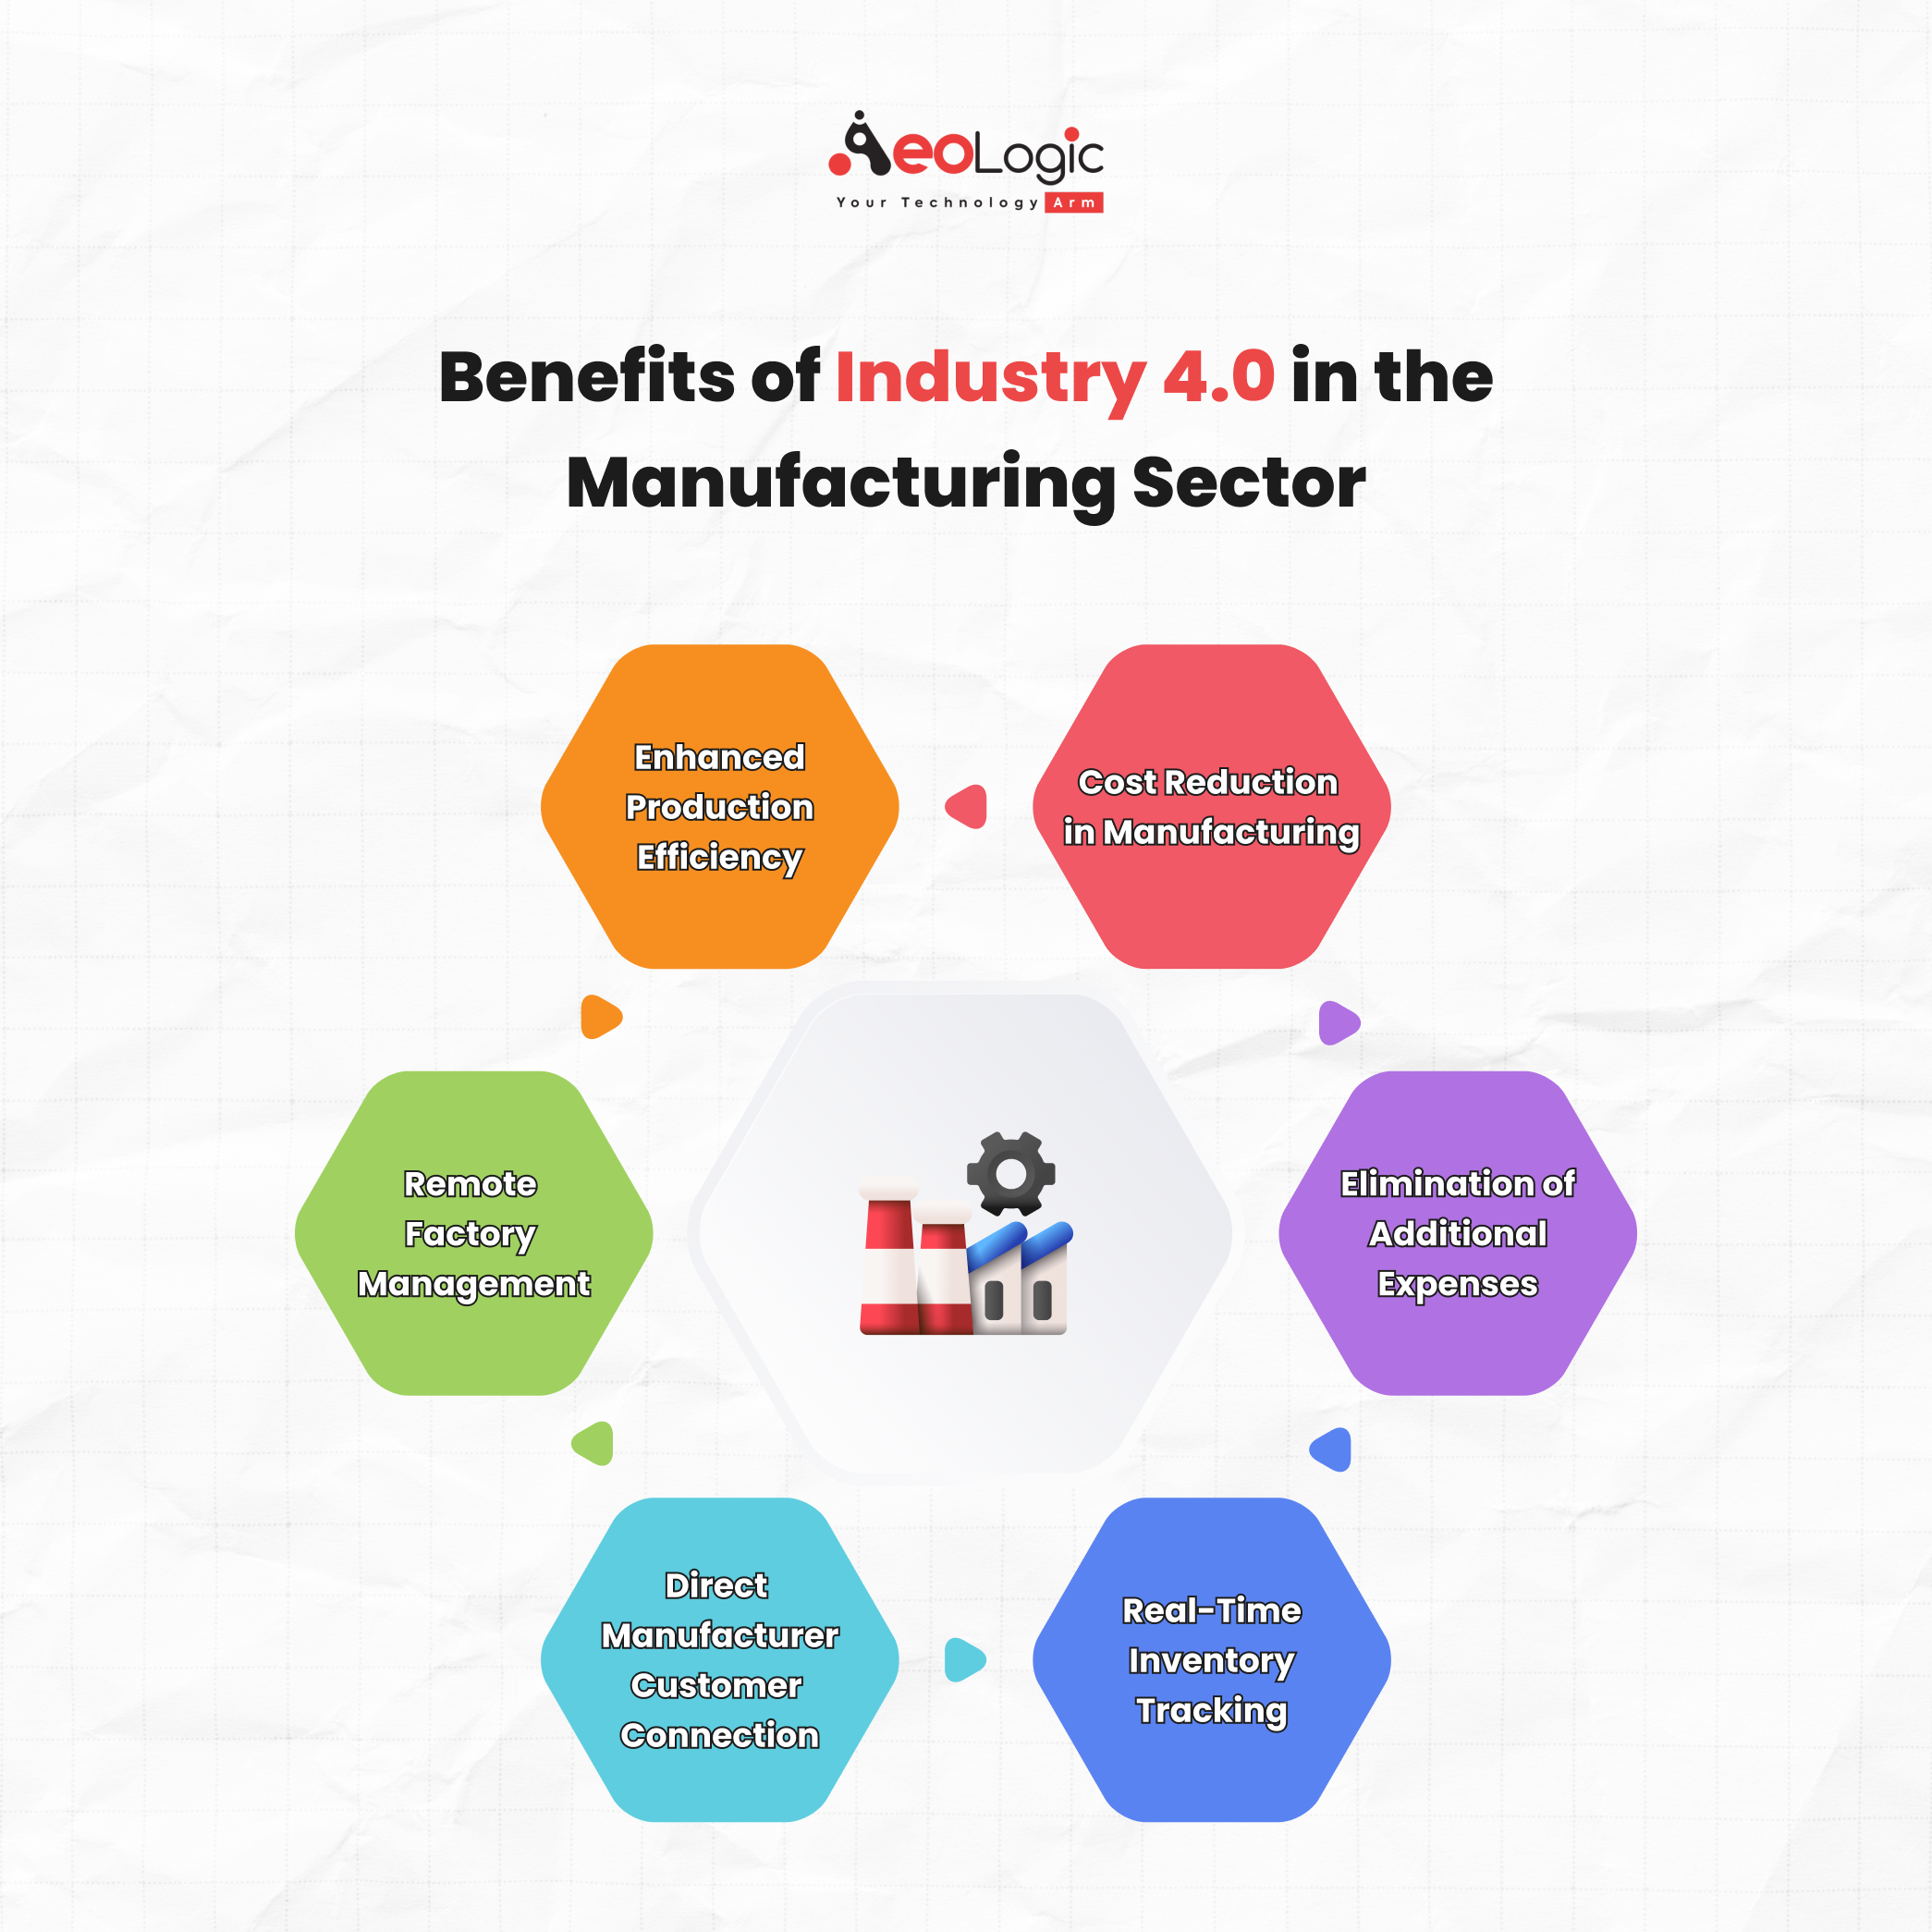 Benefits of Industry 4.0 in the Manufacturing Sector